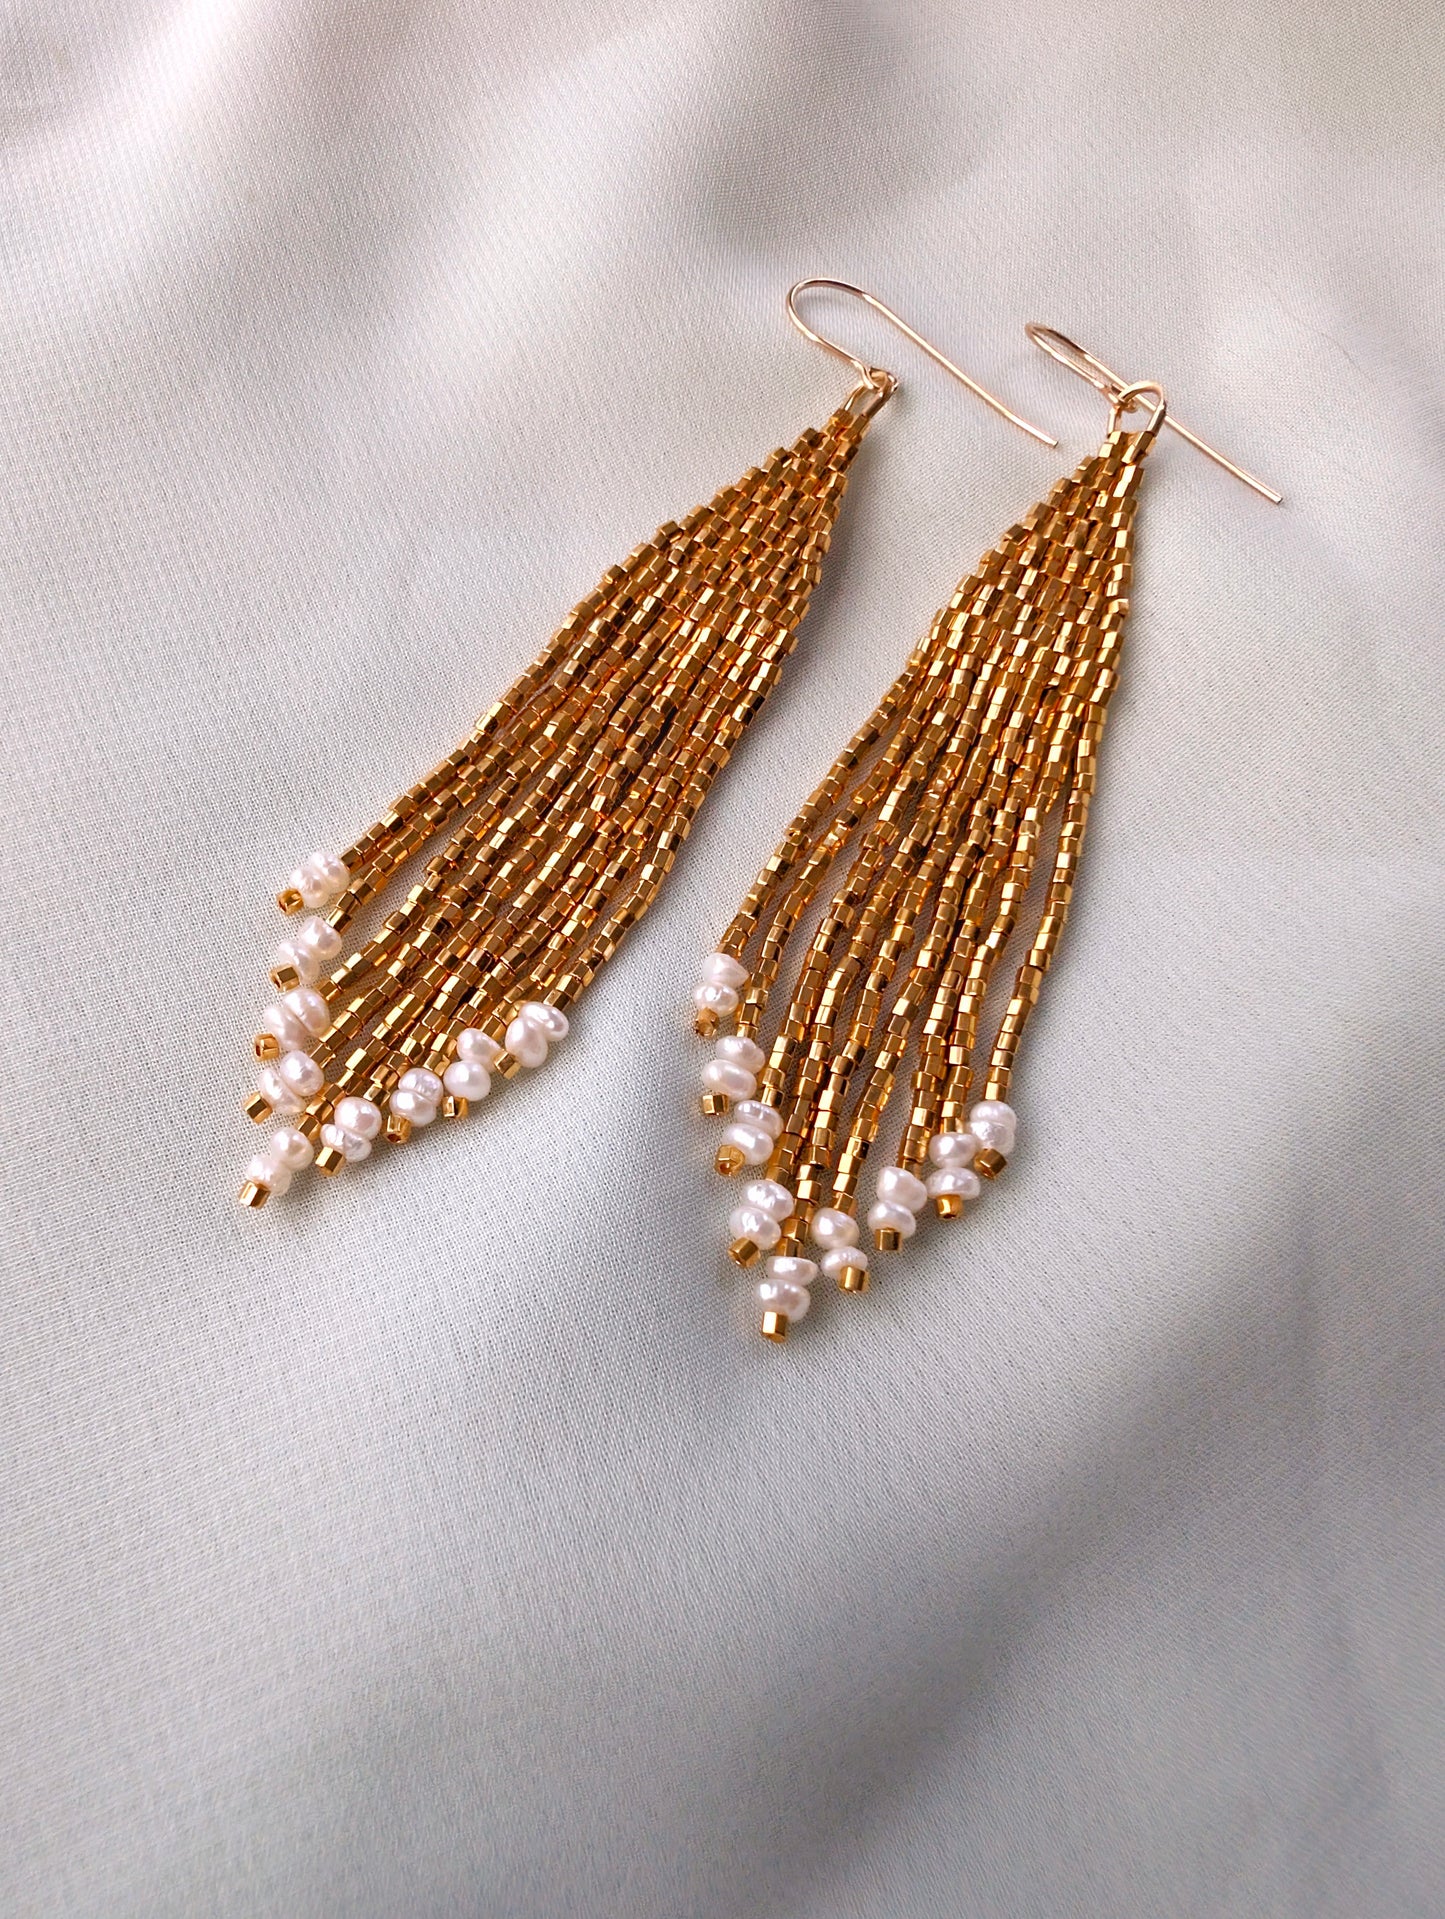 Liquid Gold - Freshwater Pearls, 14k Gold Fill Hook & 24k Gold Plated Hex-cut Beads